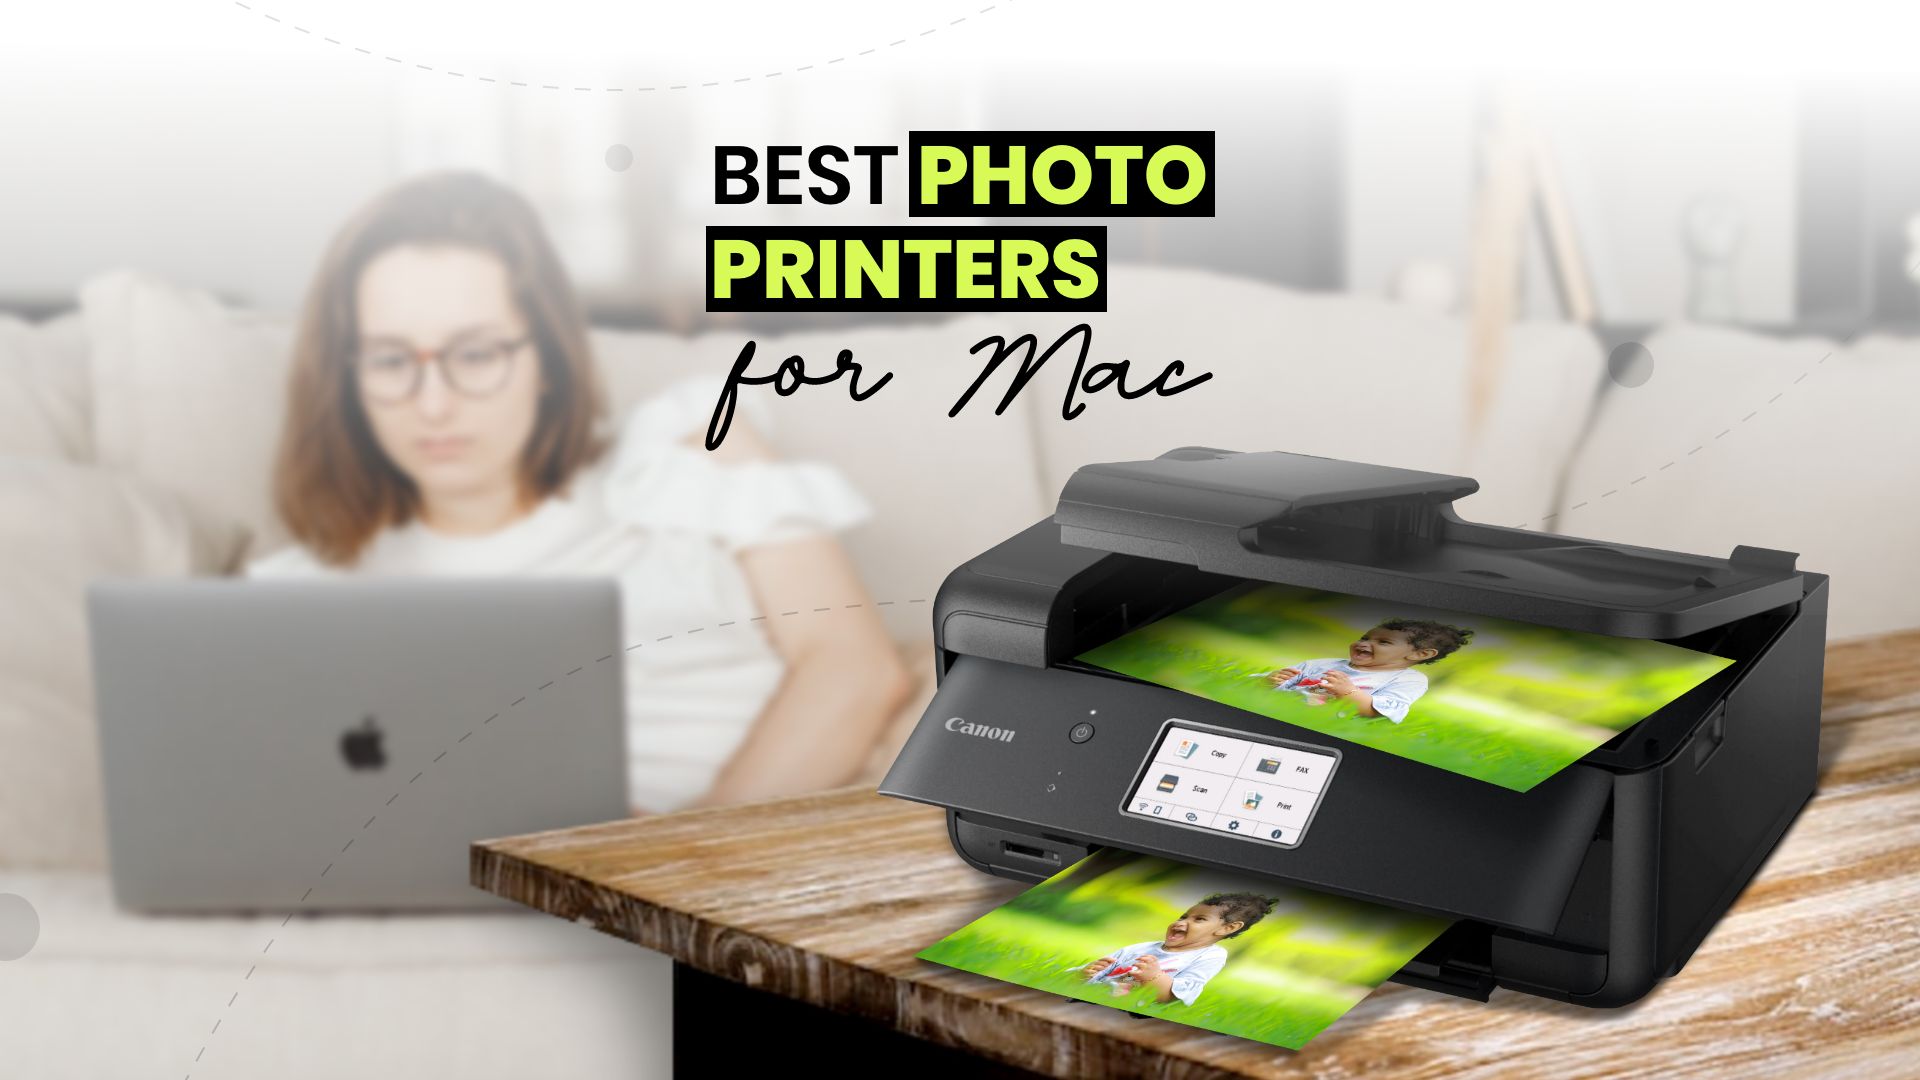 10 Best Photo Printers for Mac in 2022